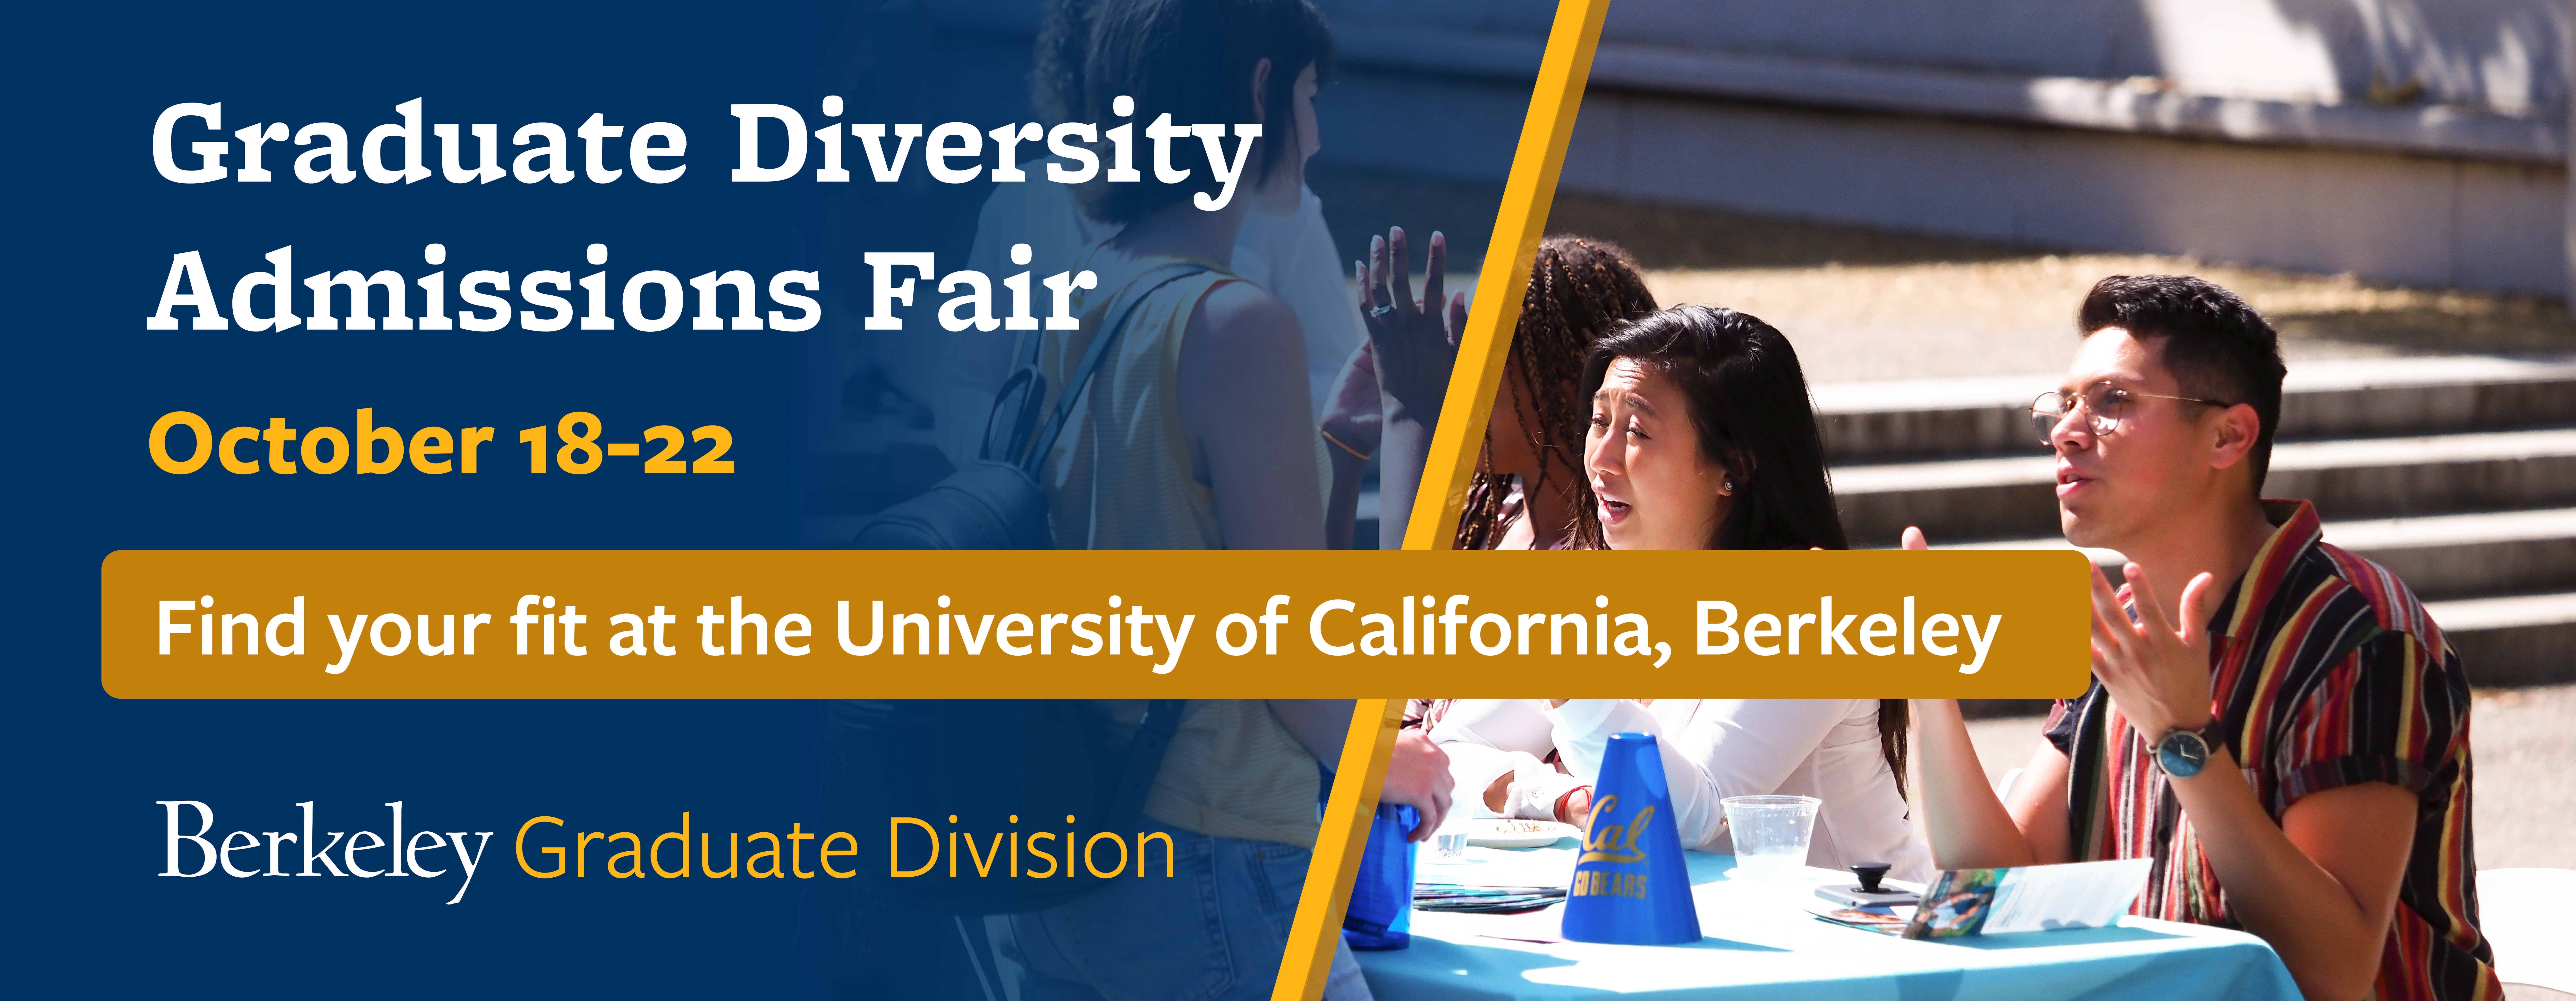 Graduate Diversity Admissions Fair text "find you fit at UC Berkeley" October 18-22, with Graduate Division logo